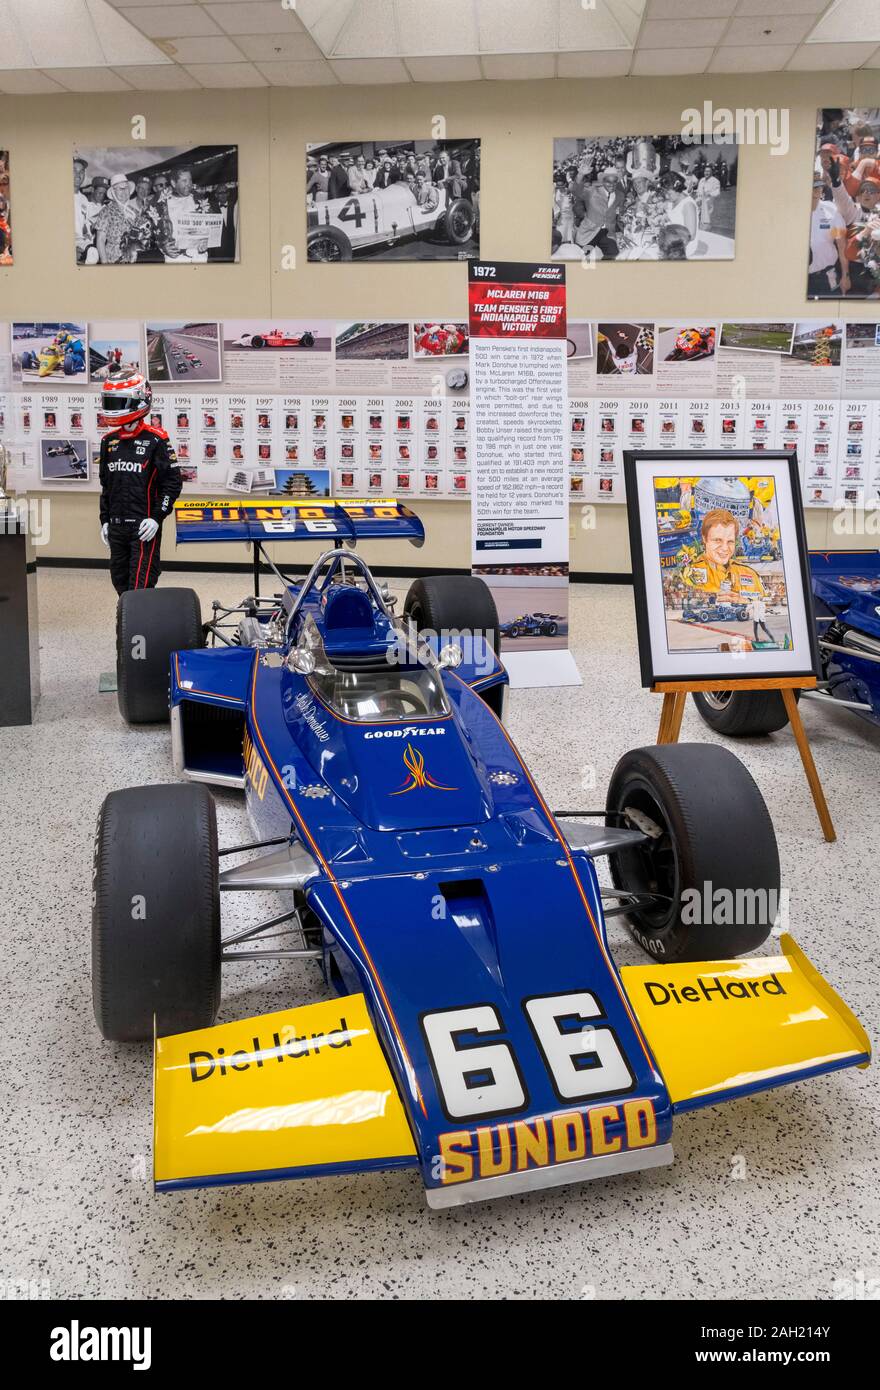 McLaren M16B. Team Penske won the1972 Indy 500 in this car  with driver Mark Donohue, Indianapolis Motor Speedway Museum, Indianapolis, Indiana, USA Stock Photo